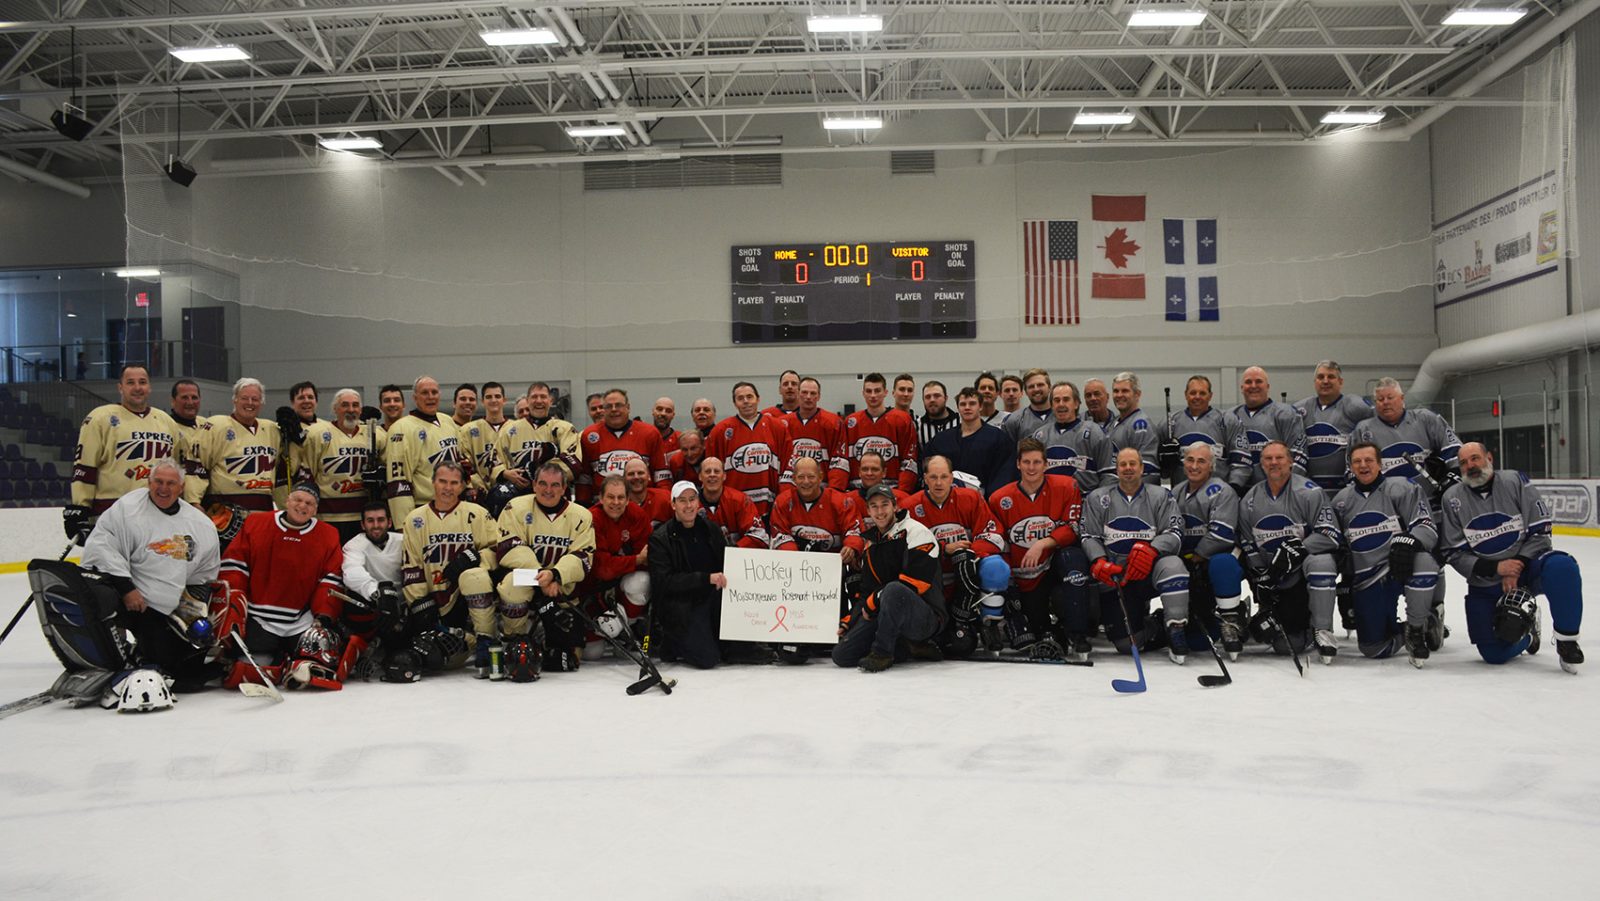 Three teams hit the ice to fight blood cancer